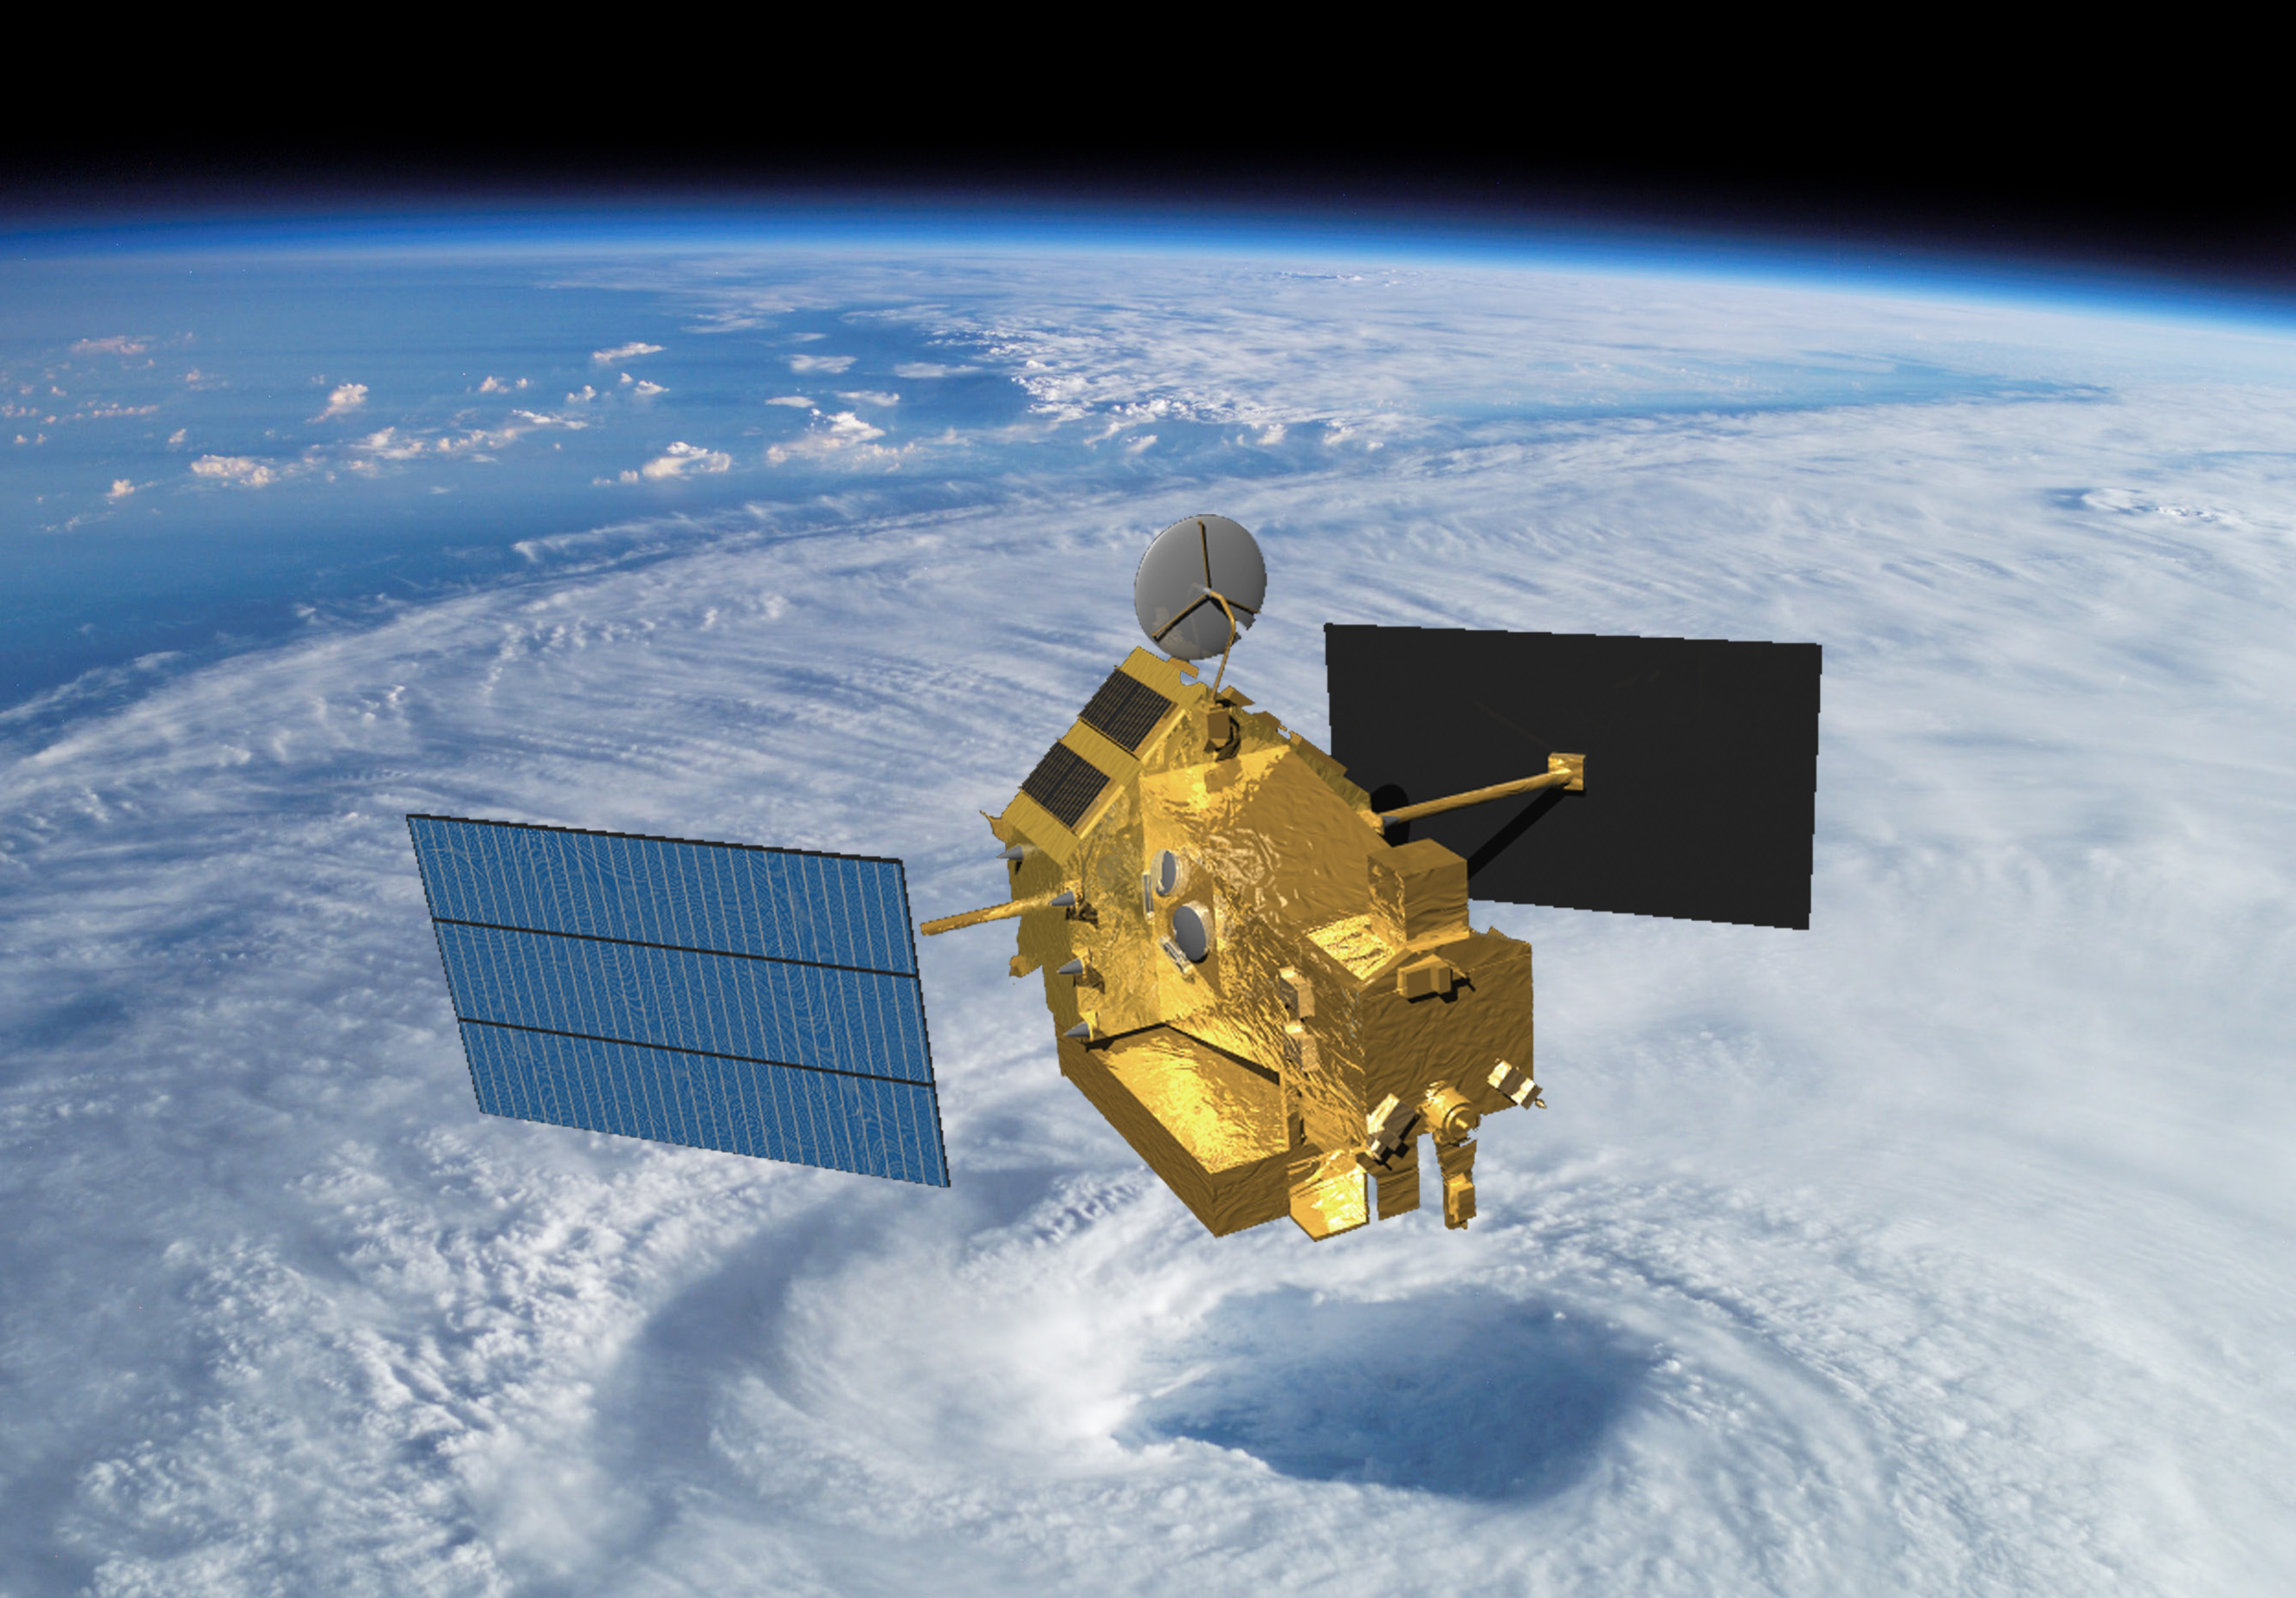 TRMM in space over a hurricane